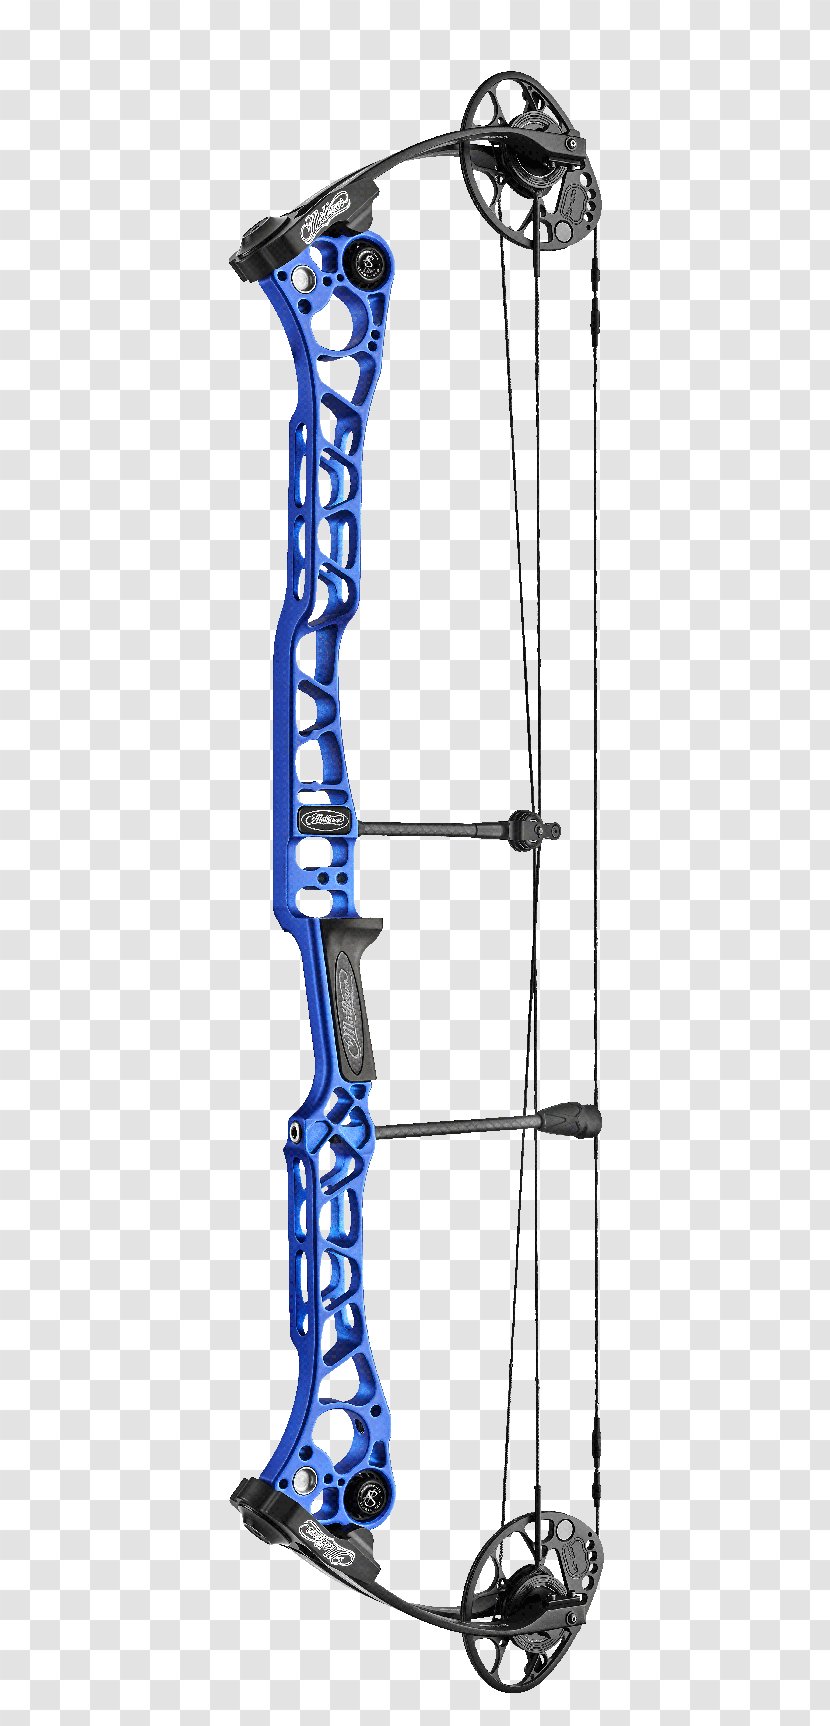 Compound Bows Bow And Arrow World Archery Federation - Recurve - NEET Equipment Transparent PNG